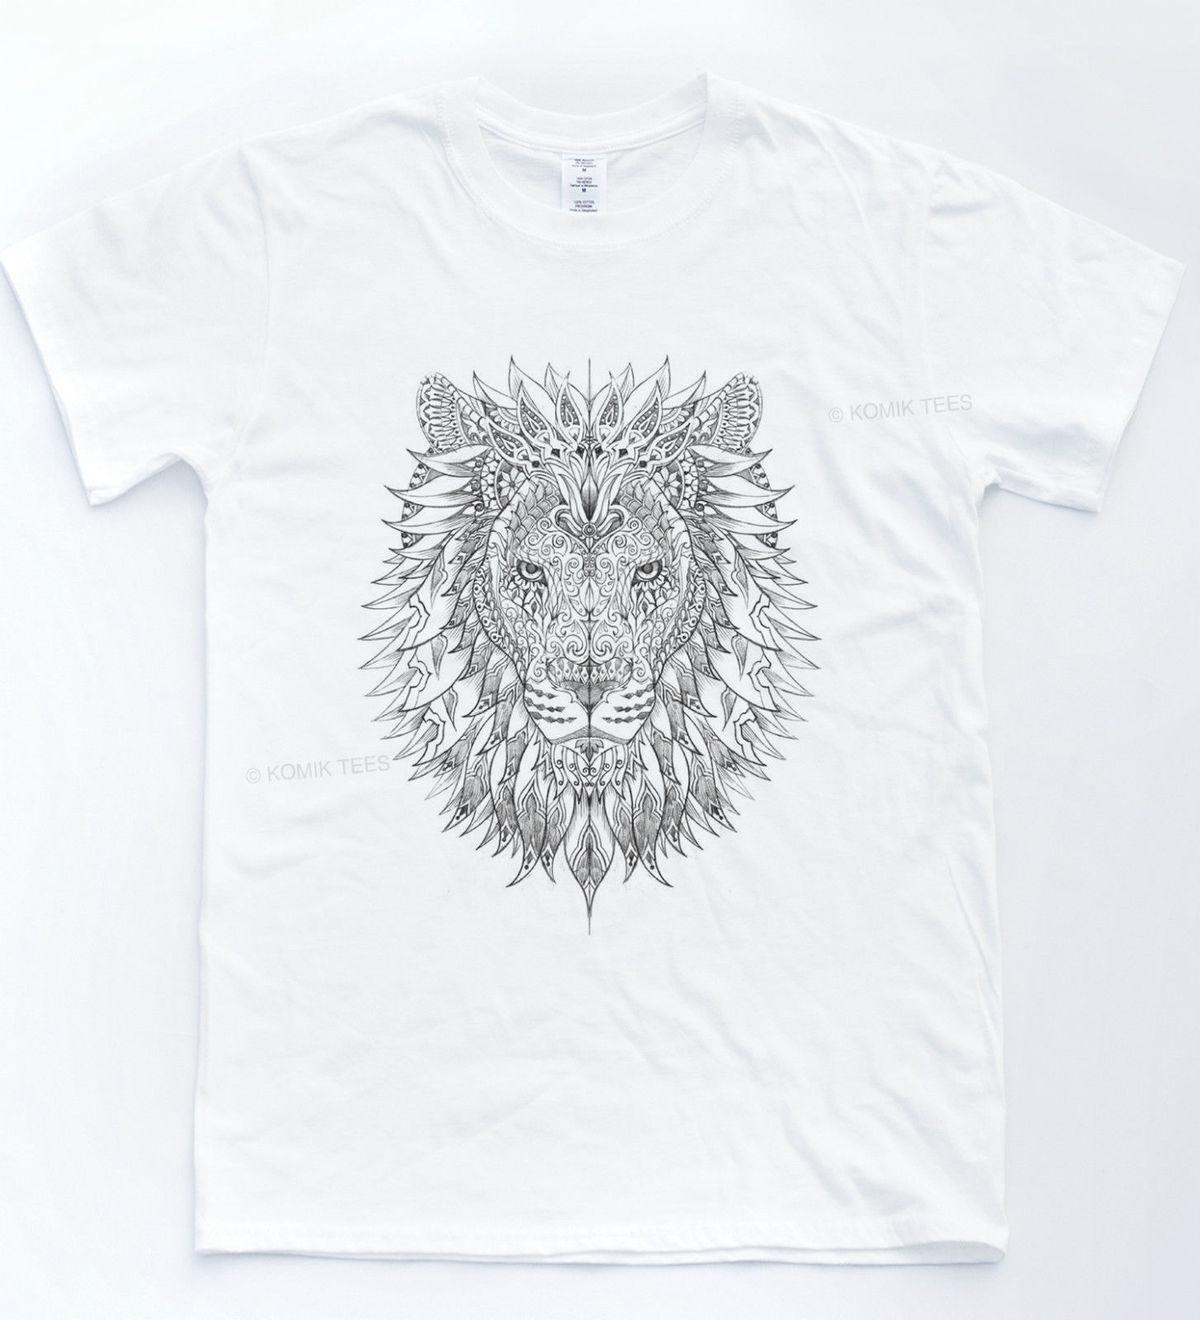 Shirt Sketch Template at PaintingValley.com | Explore collection of ...